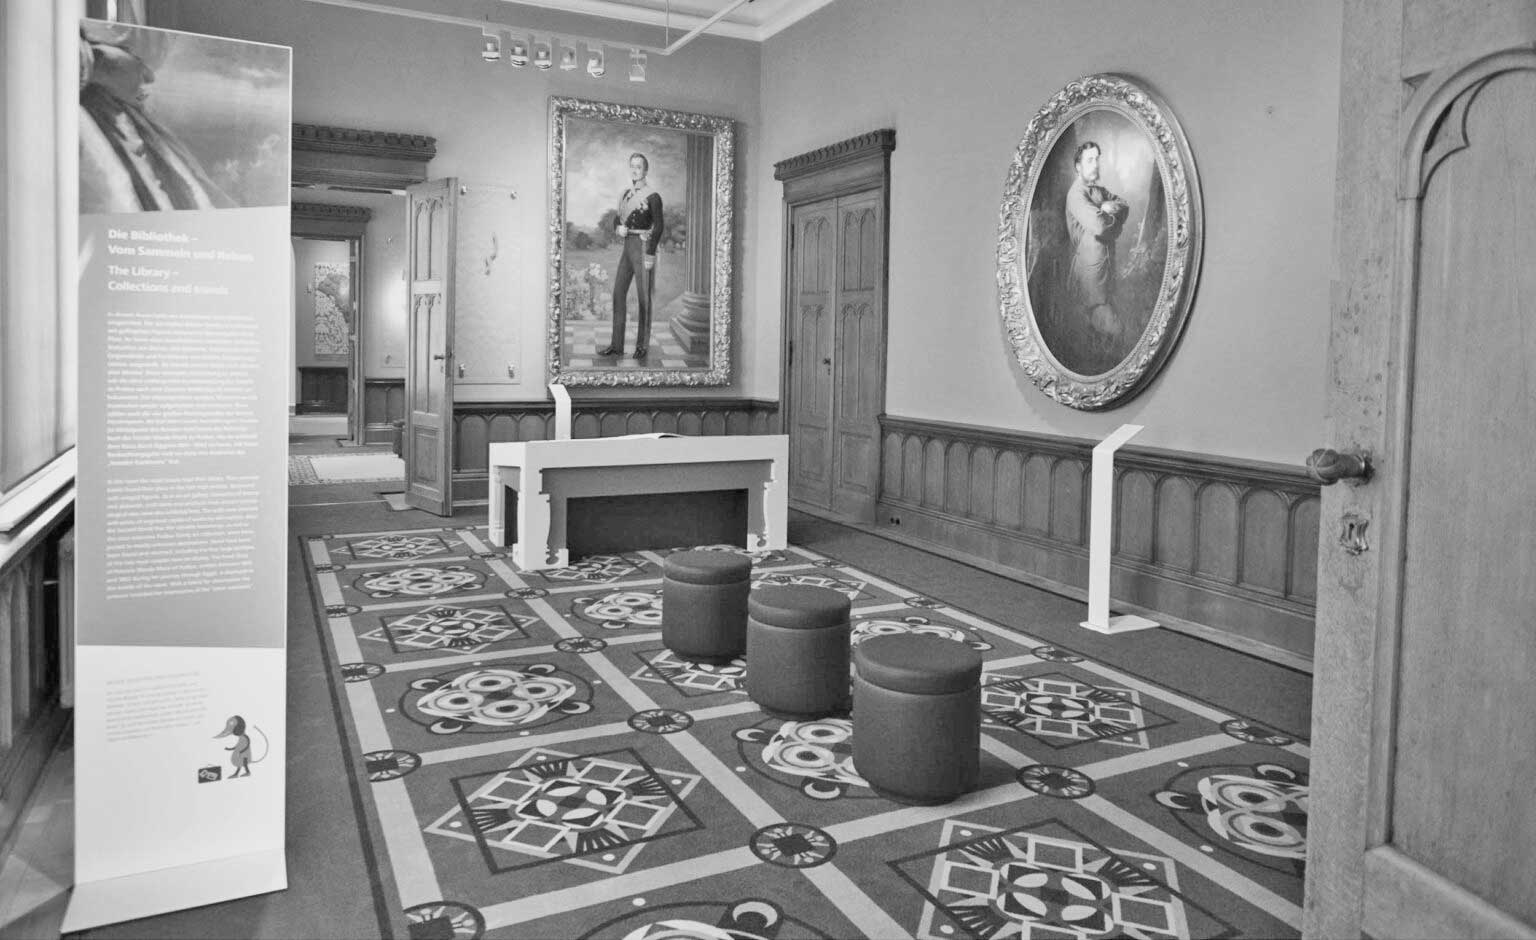 Photo of the next project: Granitz hunting lodge: It presents the contemporary image of a salon with a wood-panelled ceiling and honey-coloured double doors. The eye-catcher is the ornamental carpet in shades of grey that covers the floor of the room. In the centre of the picture, three dark red stools are placed in a row. On the wall in the background of the picture hangs a large rectangular painting of a nobleman in a gold frame, with a modern white table below. On the wall to the right of the picture hangs a portrait of a lady in a pompous oval gold frame.